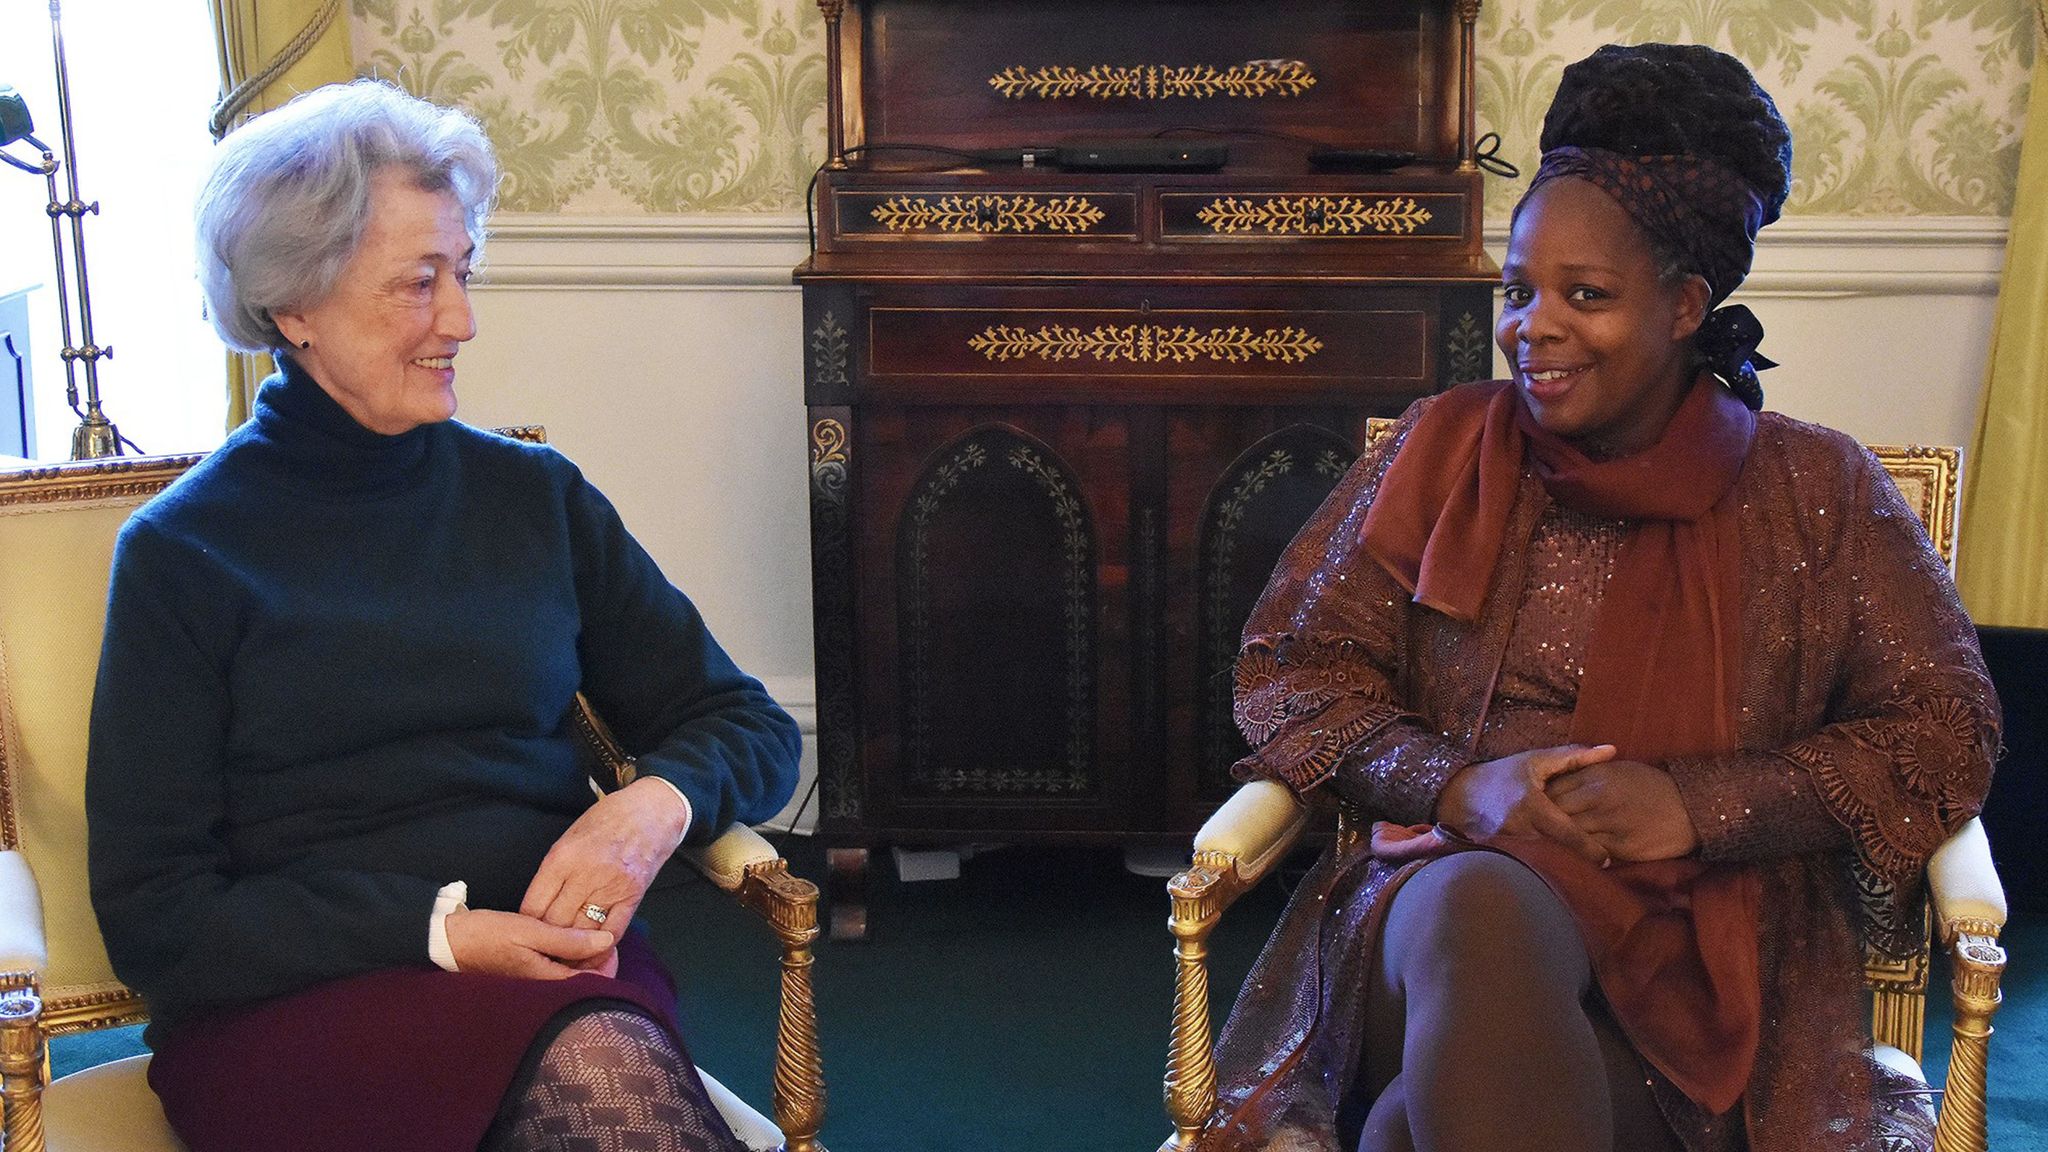 Lady Susan Hussey and Ngozi Fulani have meeting 'filled with warmth and ...